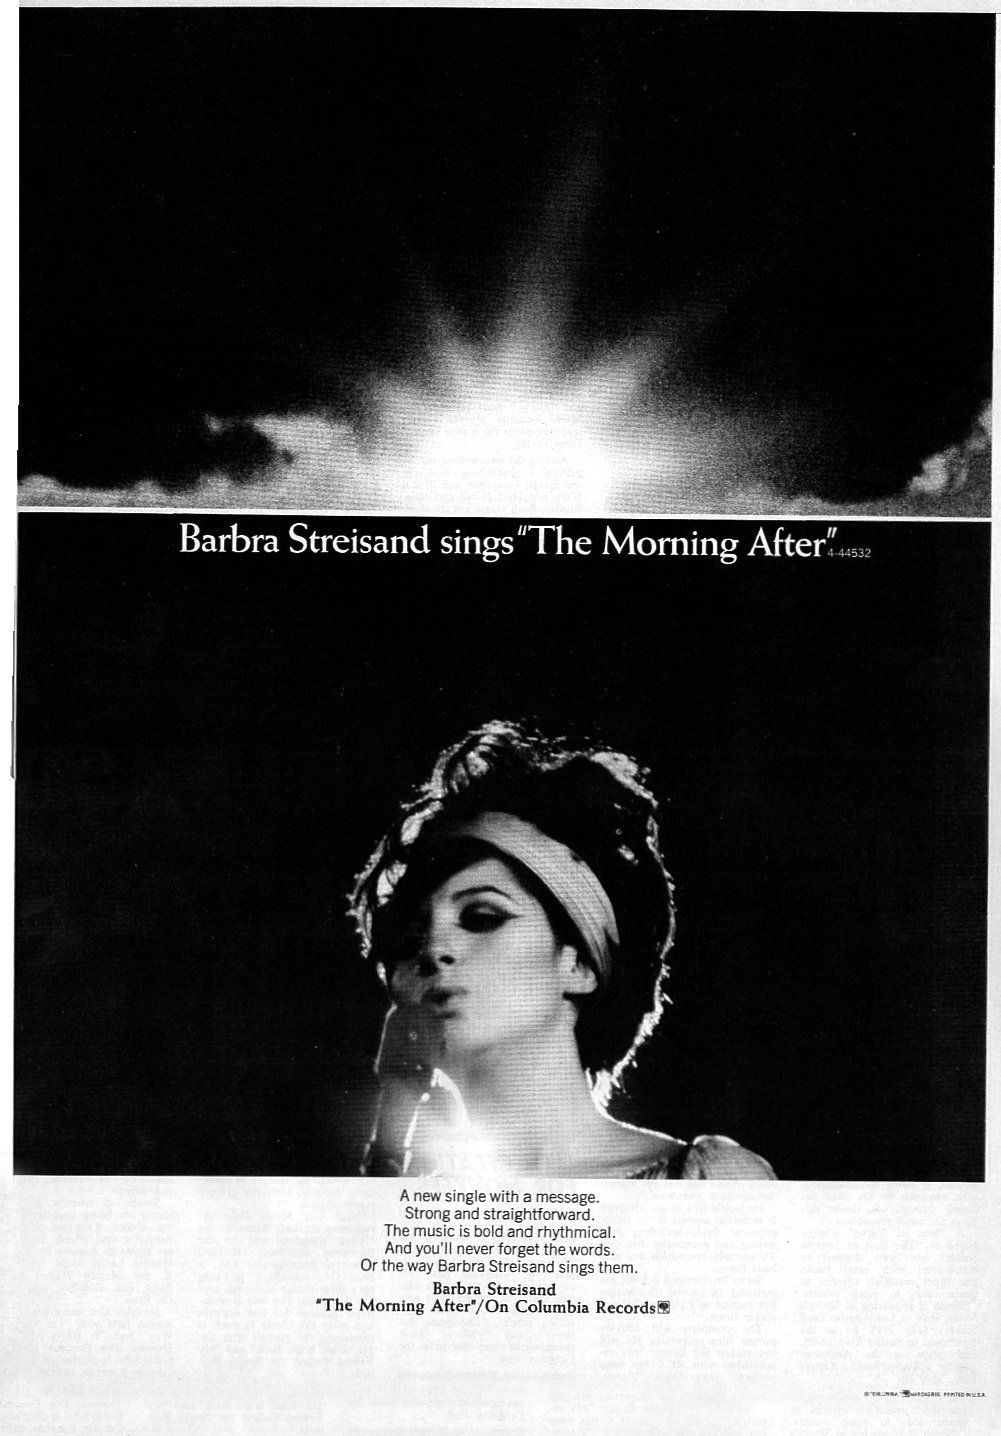 Columbia Records ad for The Morning After.